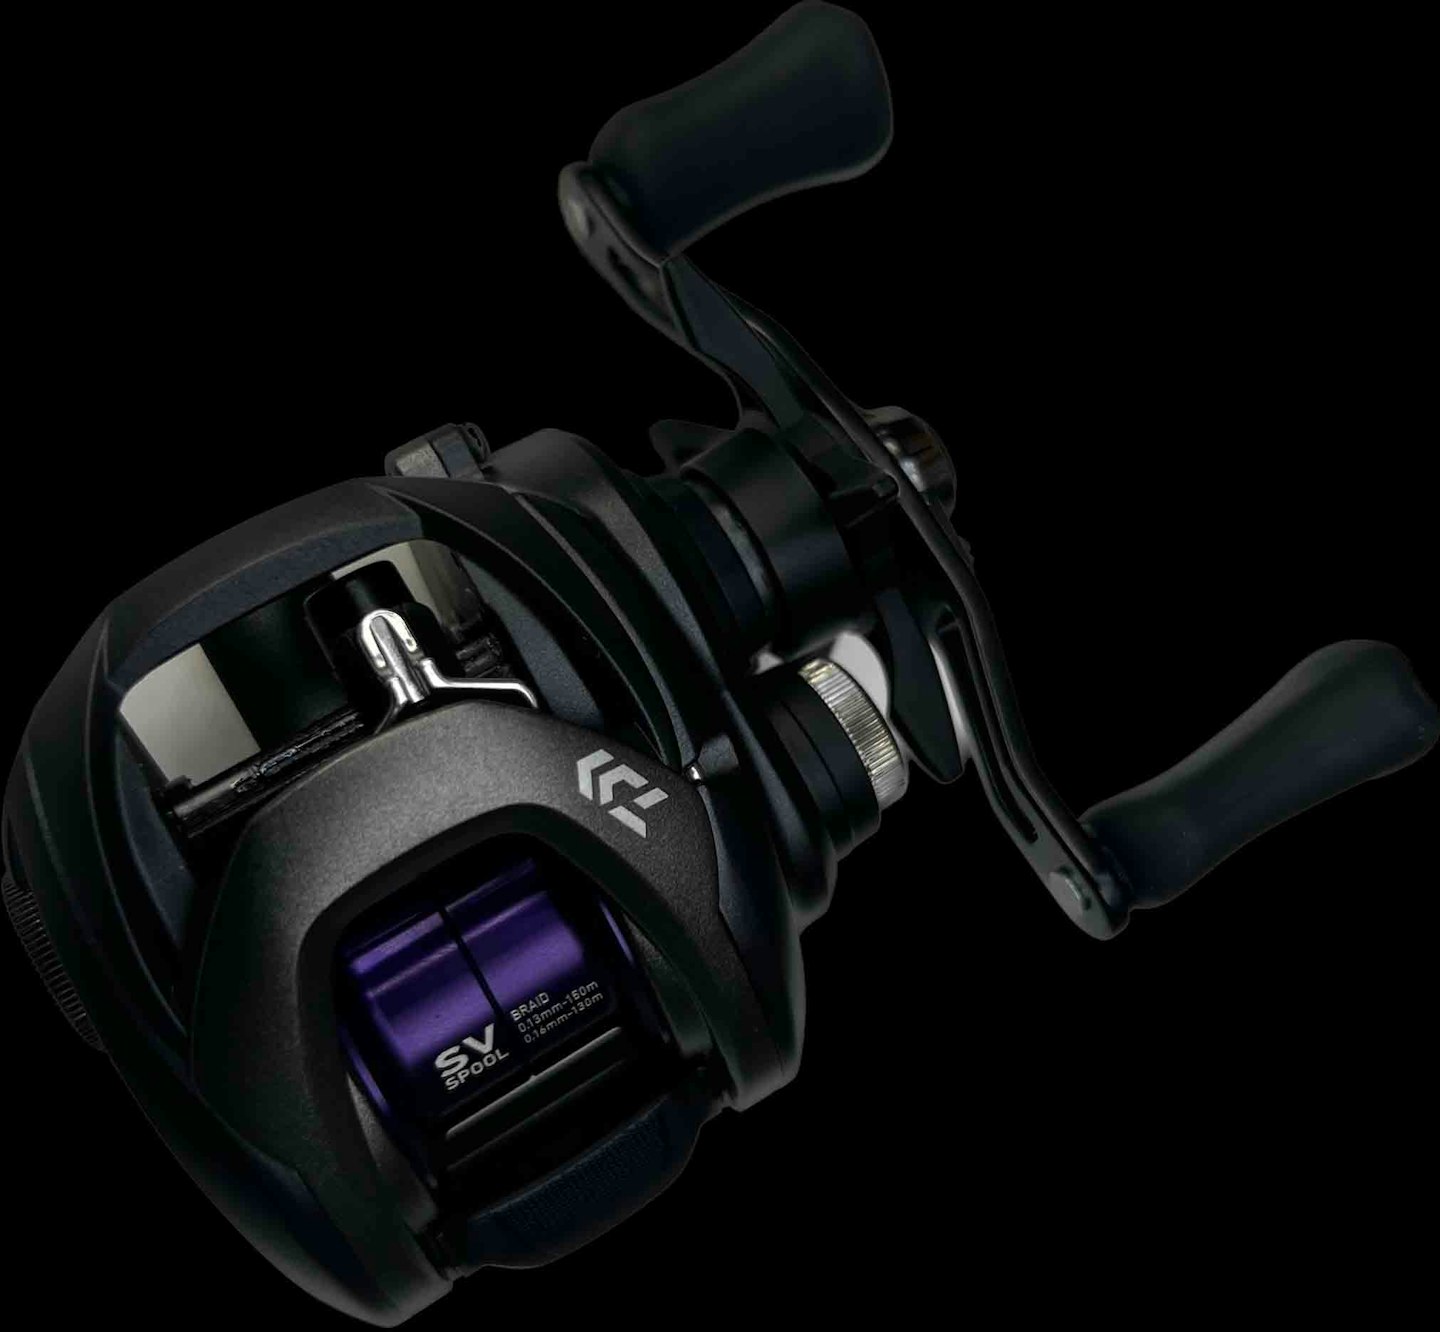 Get on the lures and keep active with Daiwa Prorex kit this winter